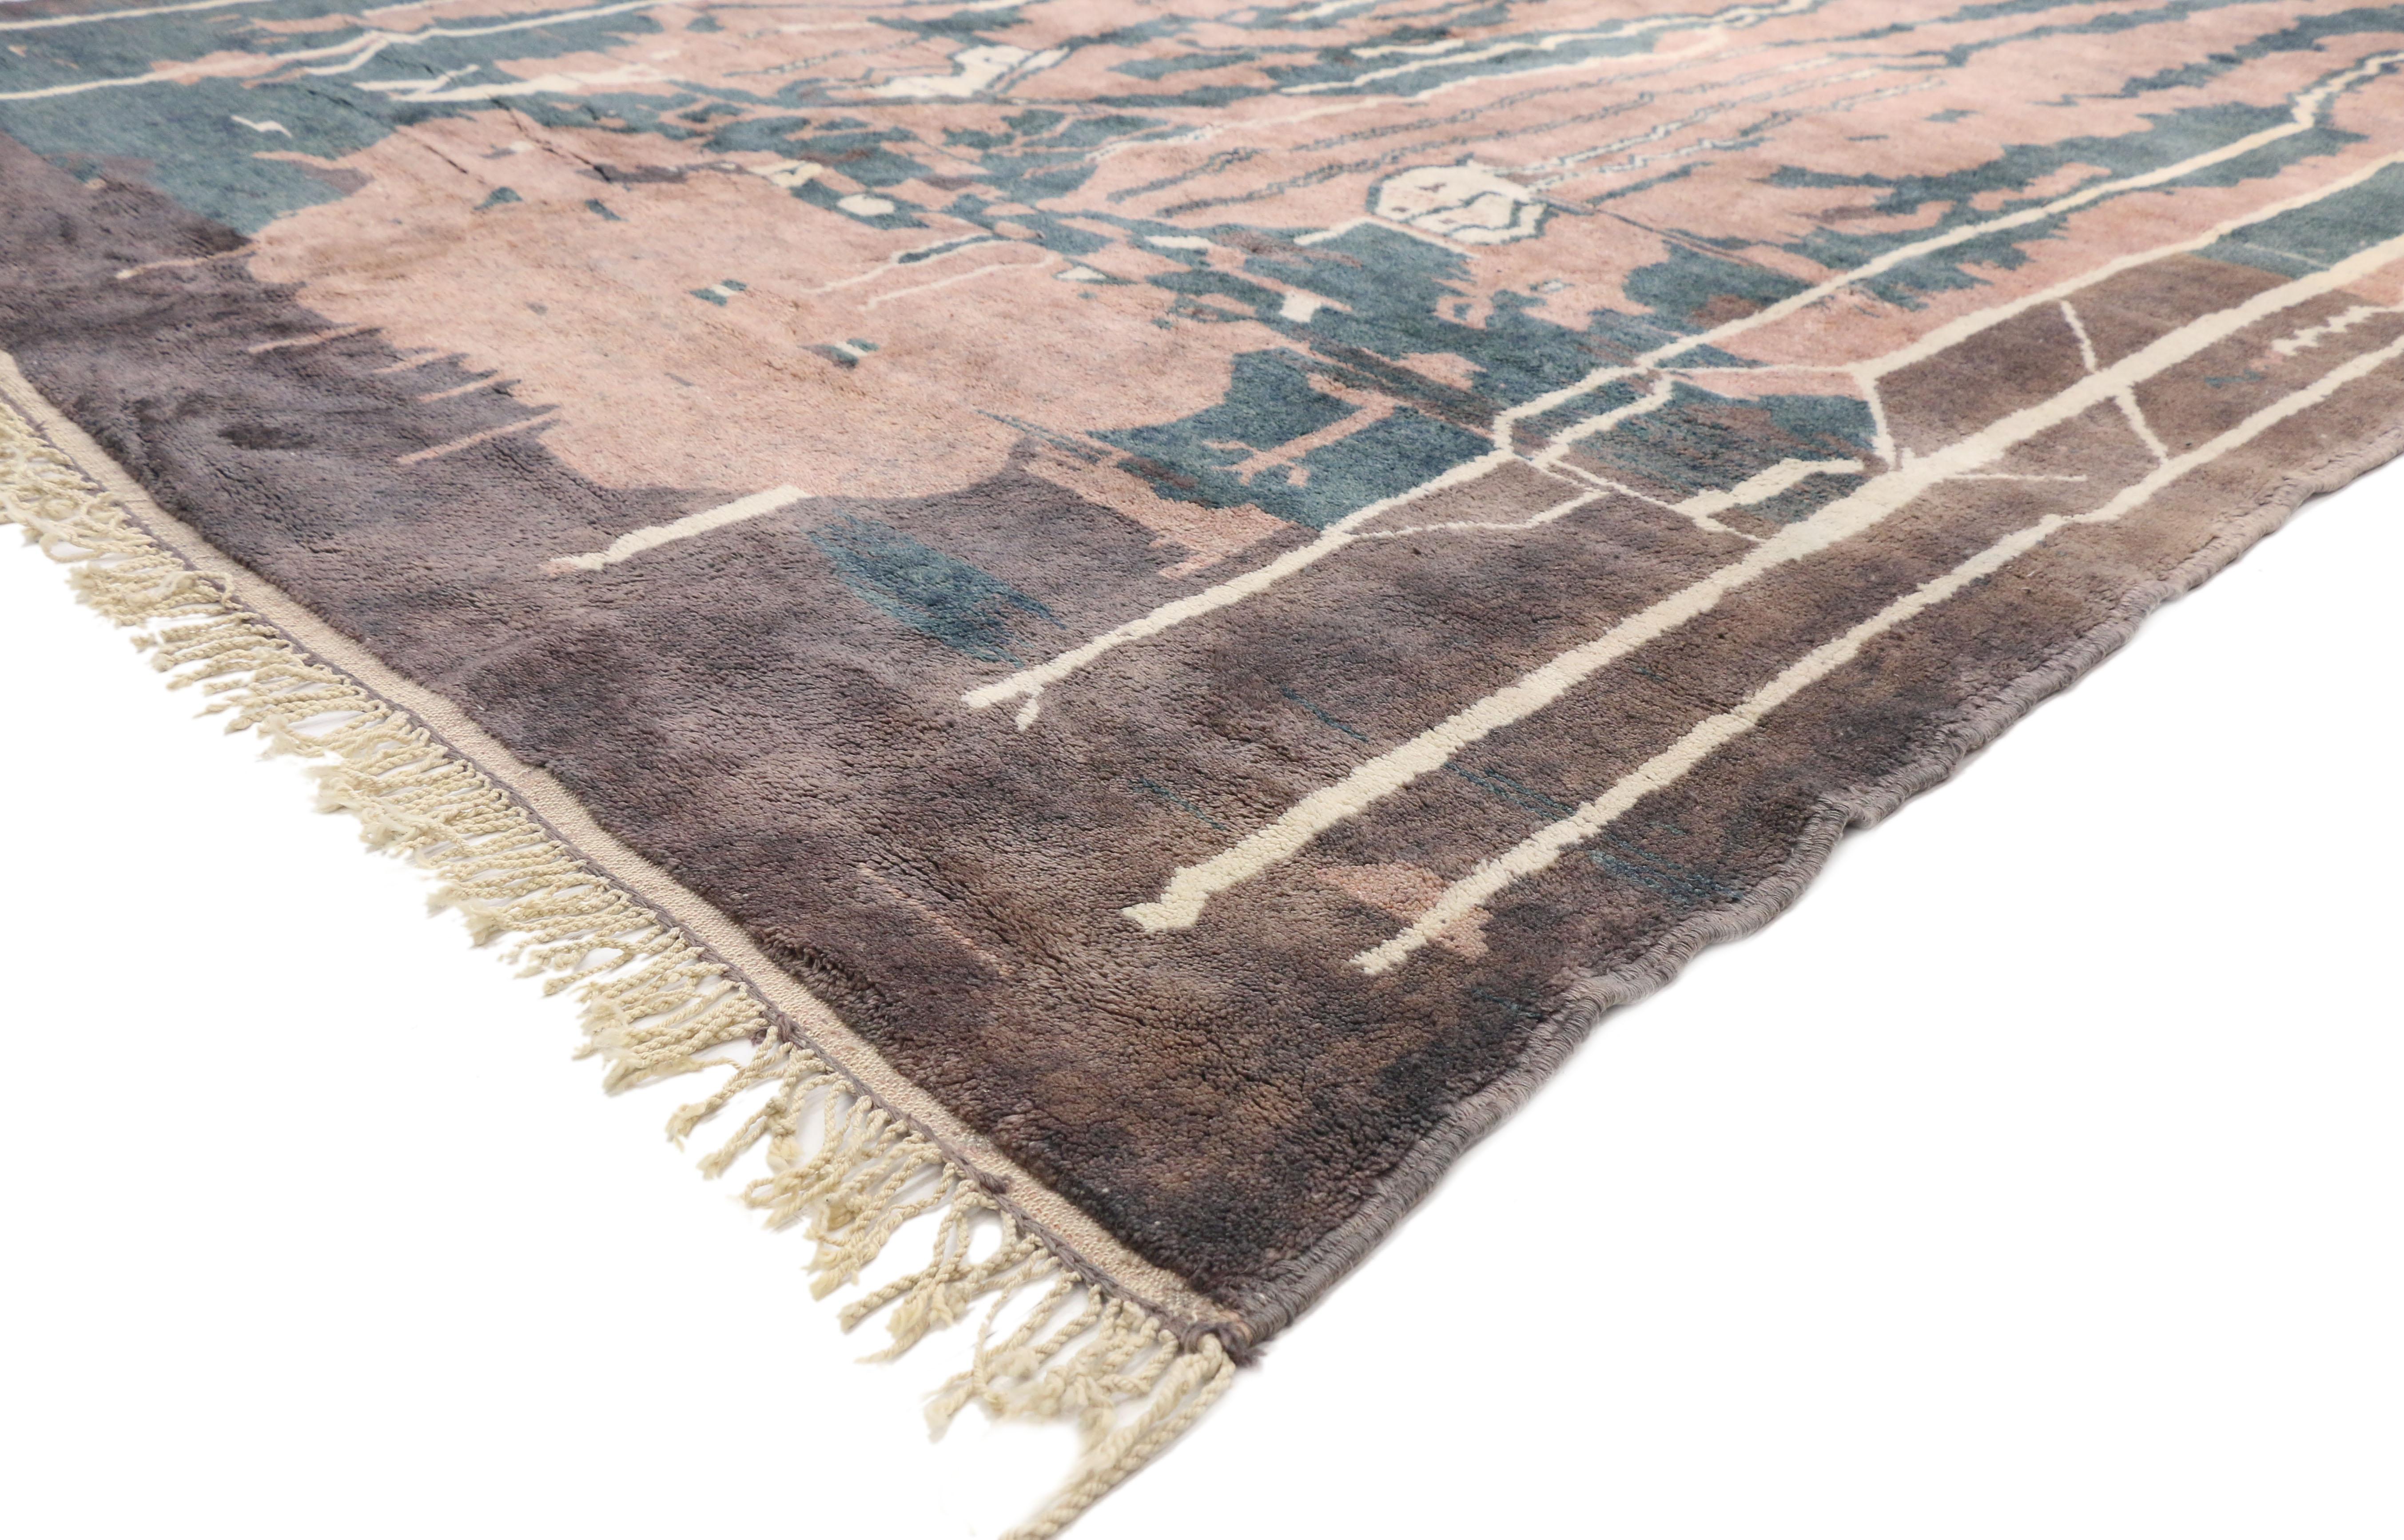 20766, contemporary Abstract Moroccan Area rug, Berber Moroccan rug. With vintage pastel colors, elements of comfort and functional versatility, this hand knotted wool contemporary Moroccan rug features an abstract style with Memphis Group Design.